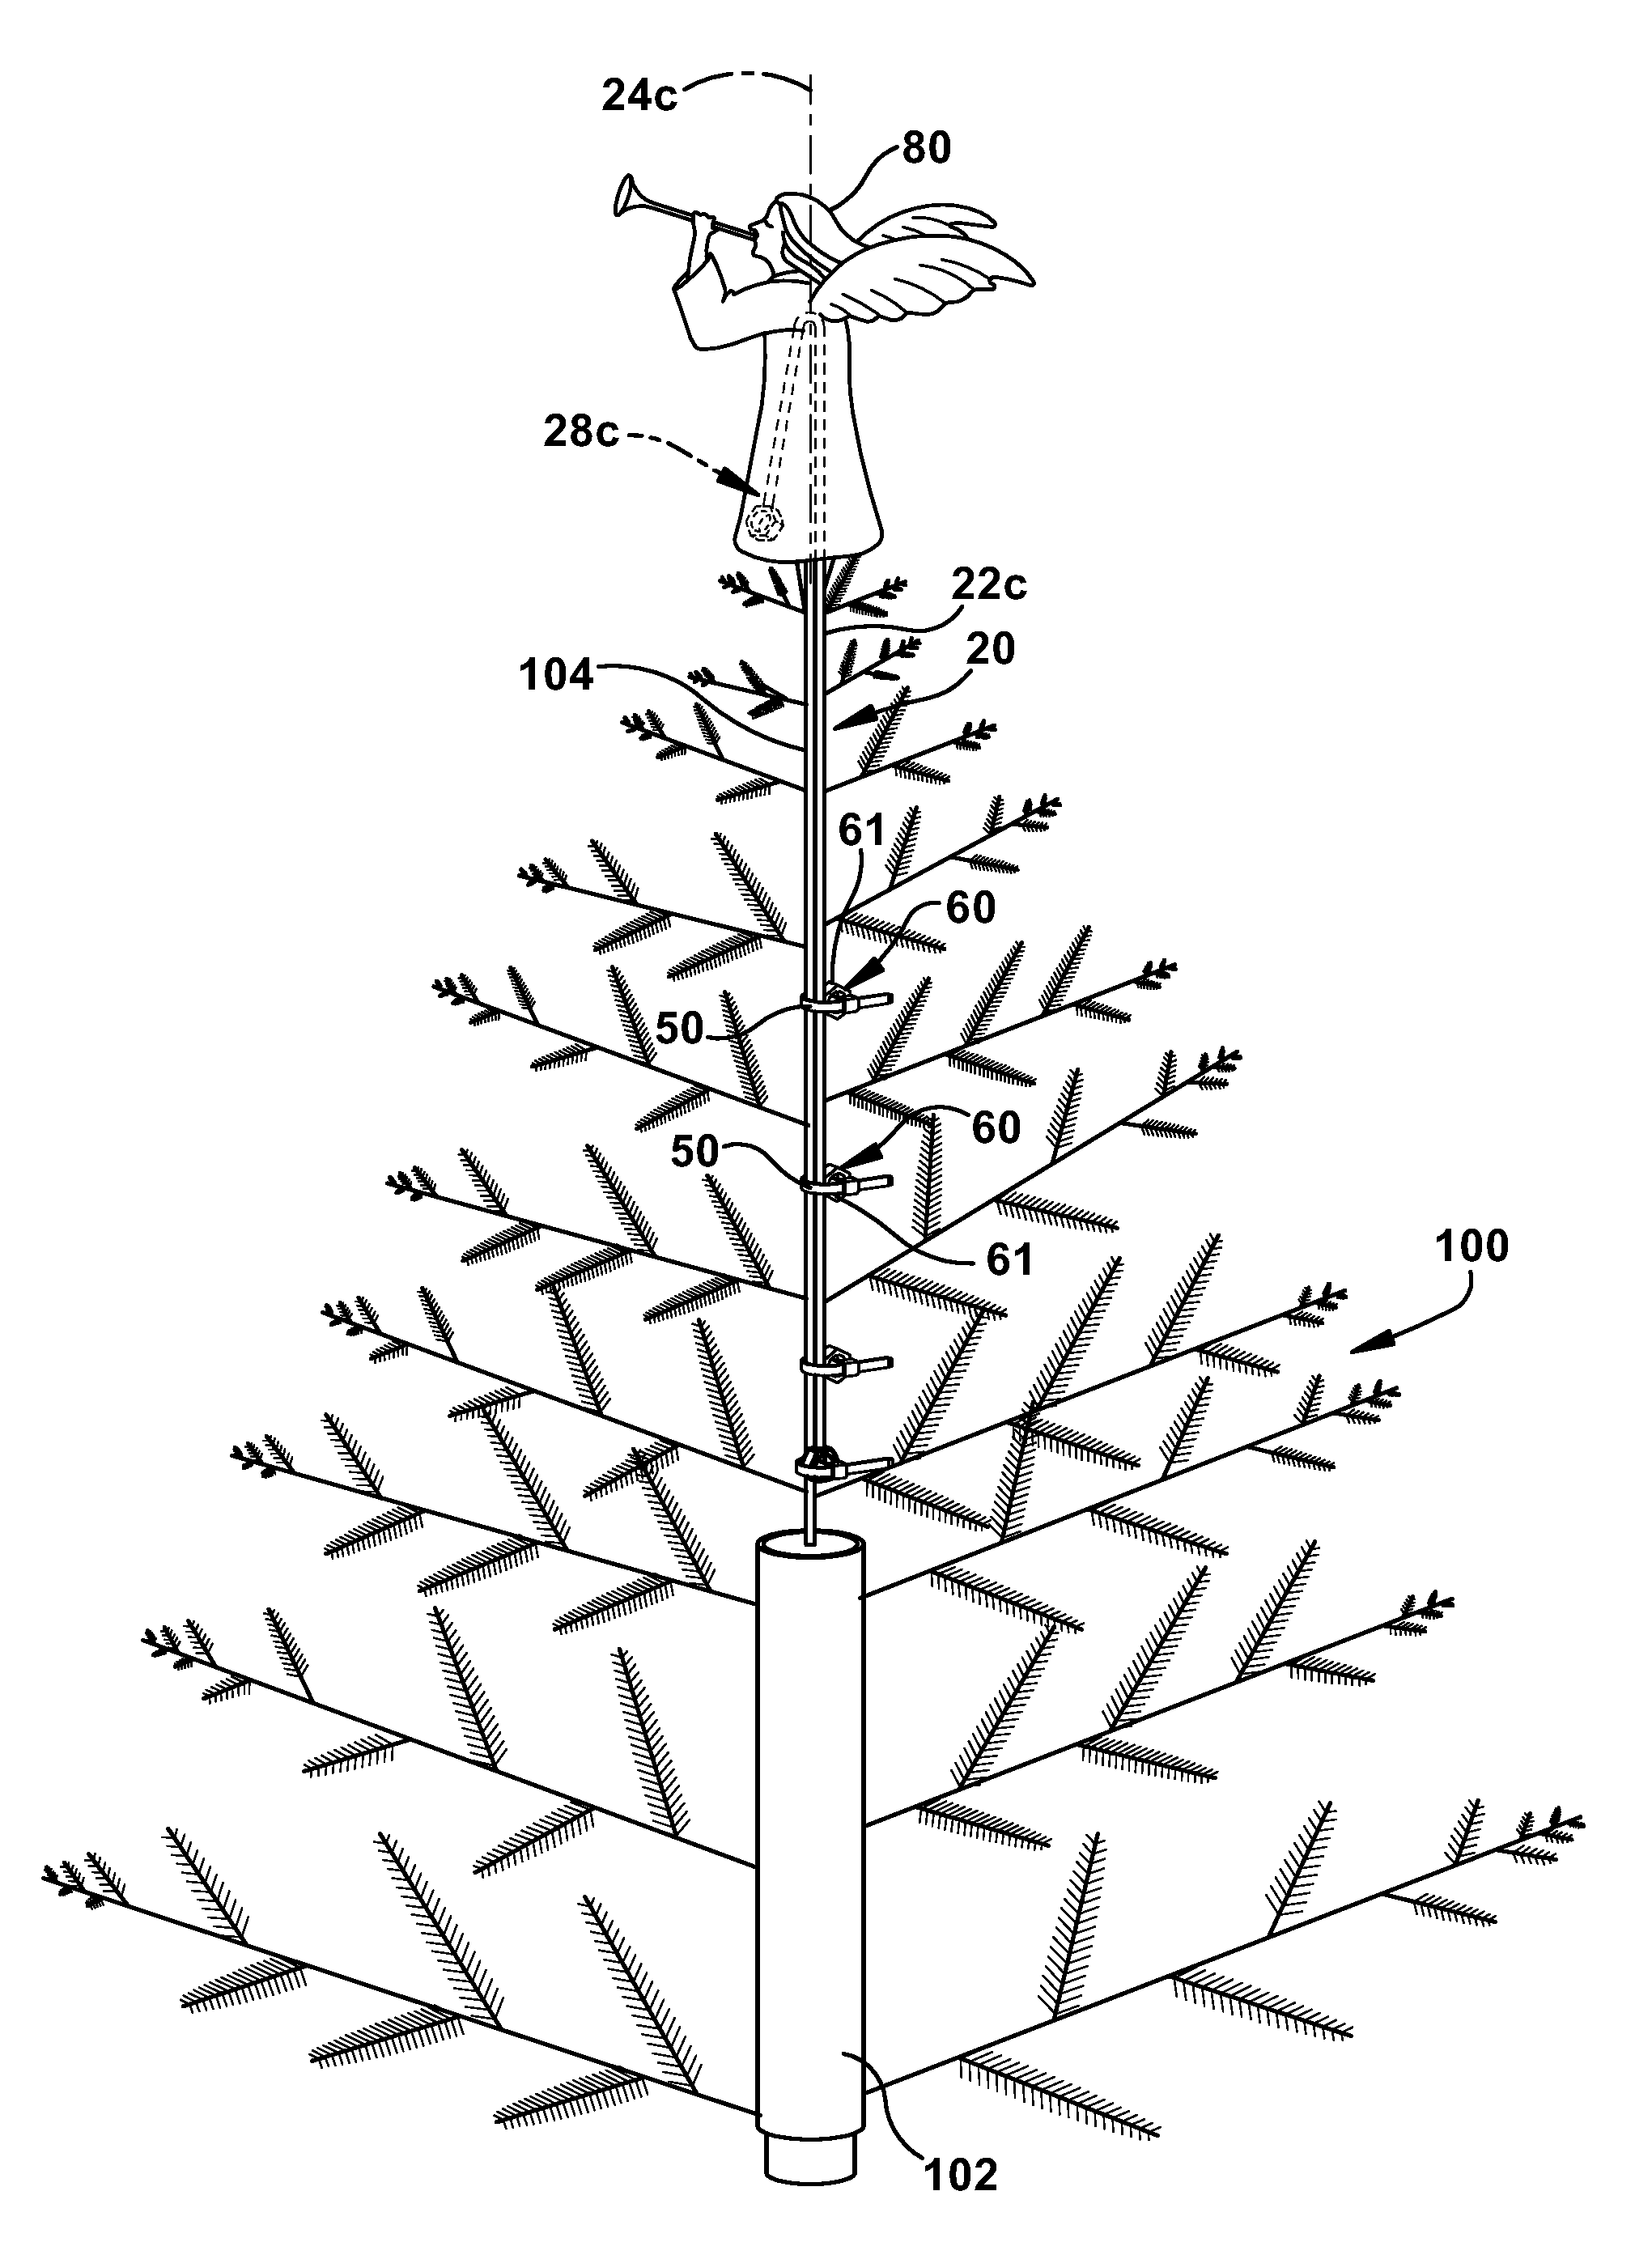 Apparatus and method for attaching a decorative fixture to a tree top